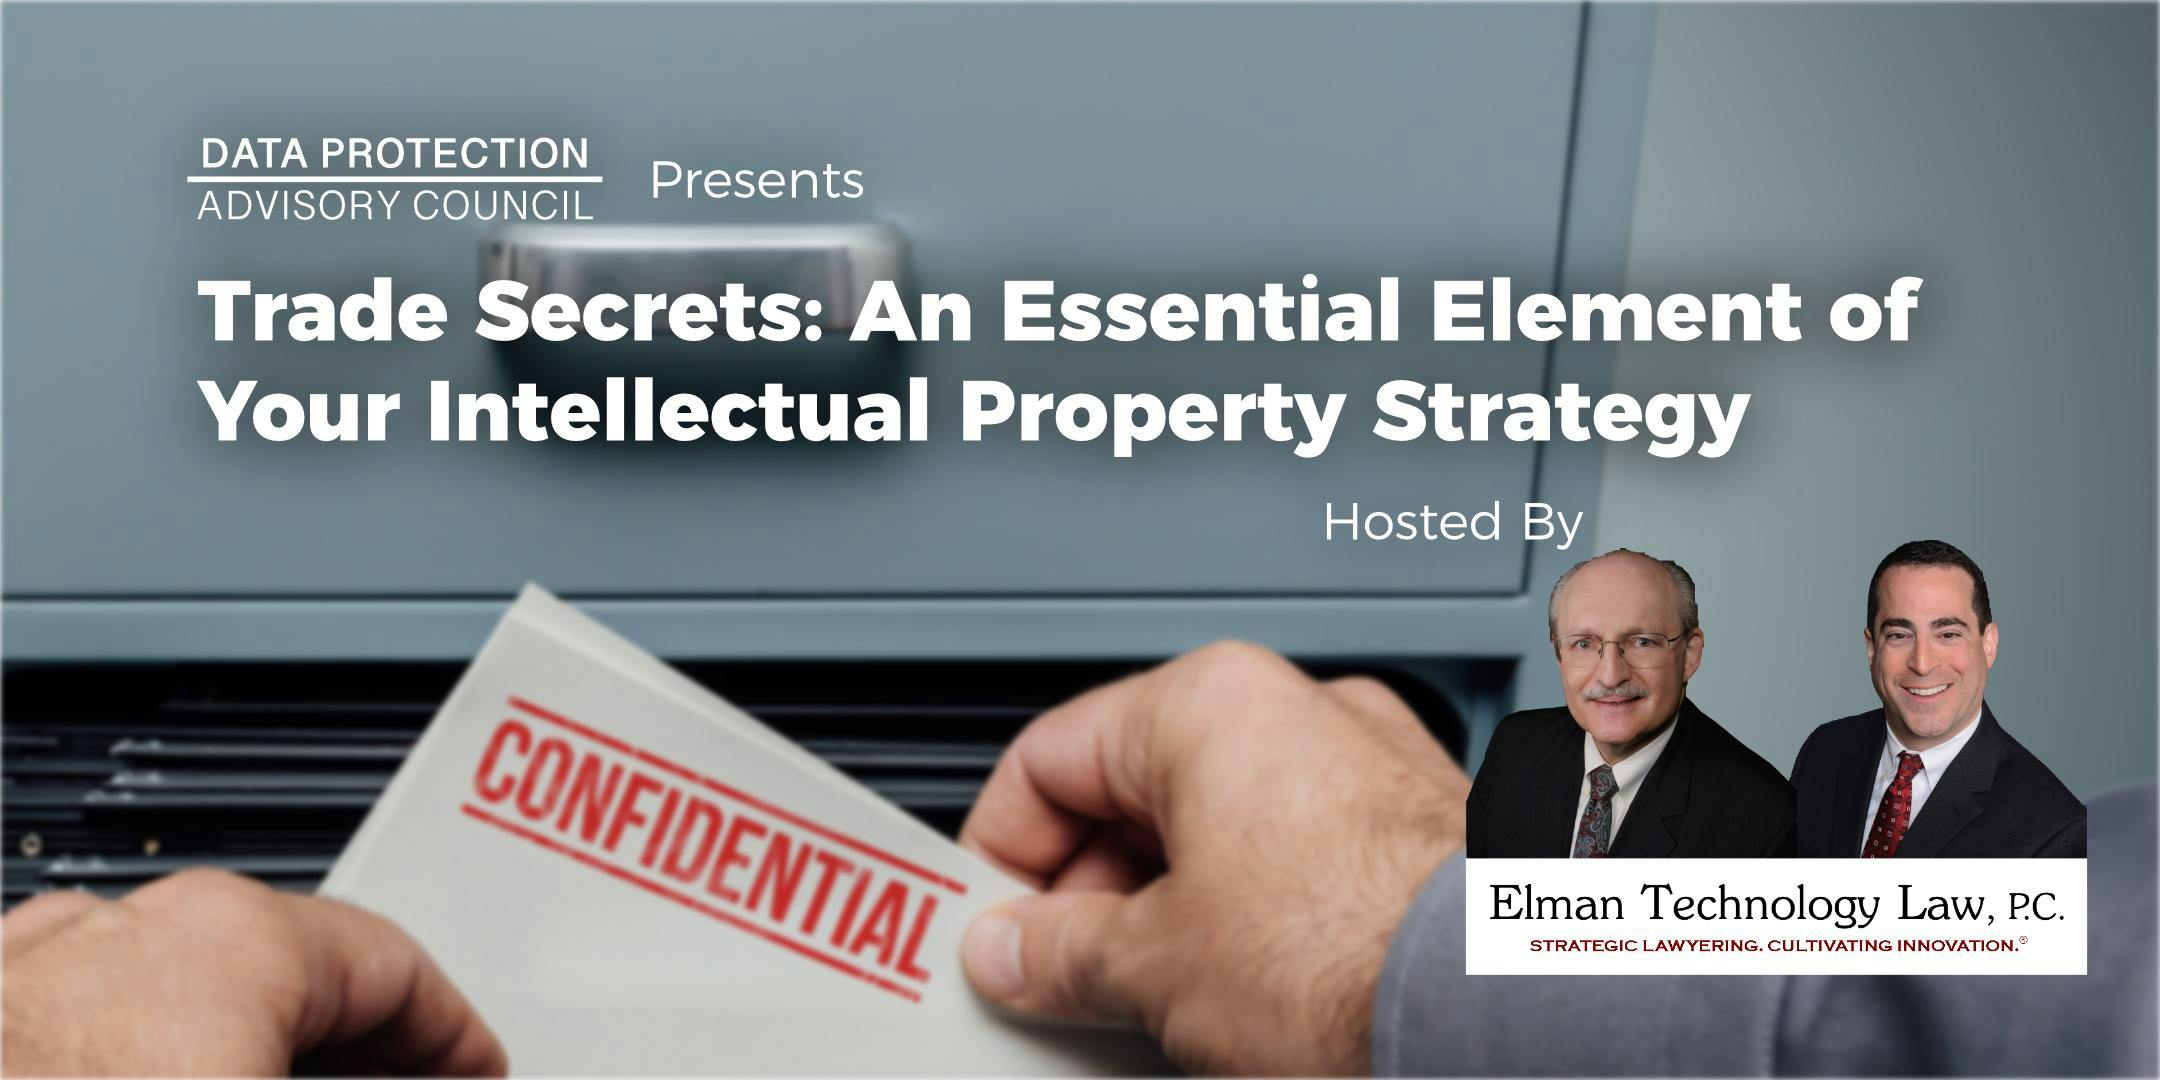 Trade Secrets: an Essential Element of Your Intellectual Property Strategy